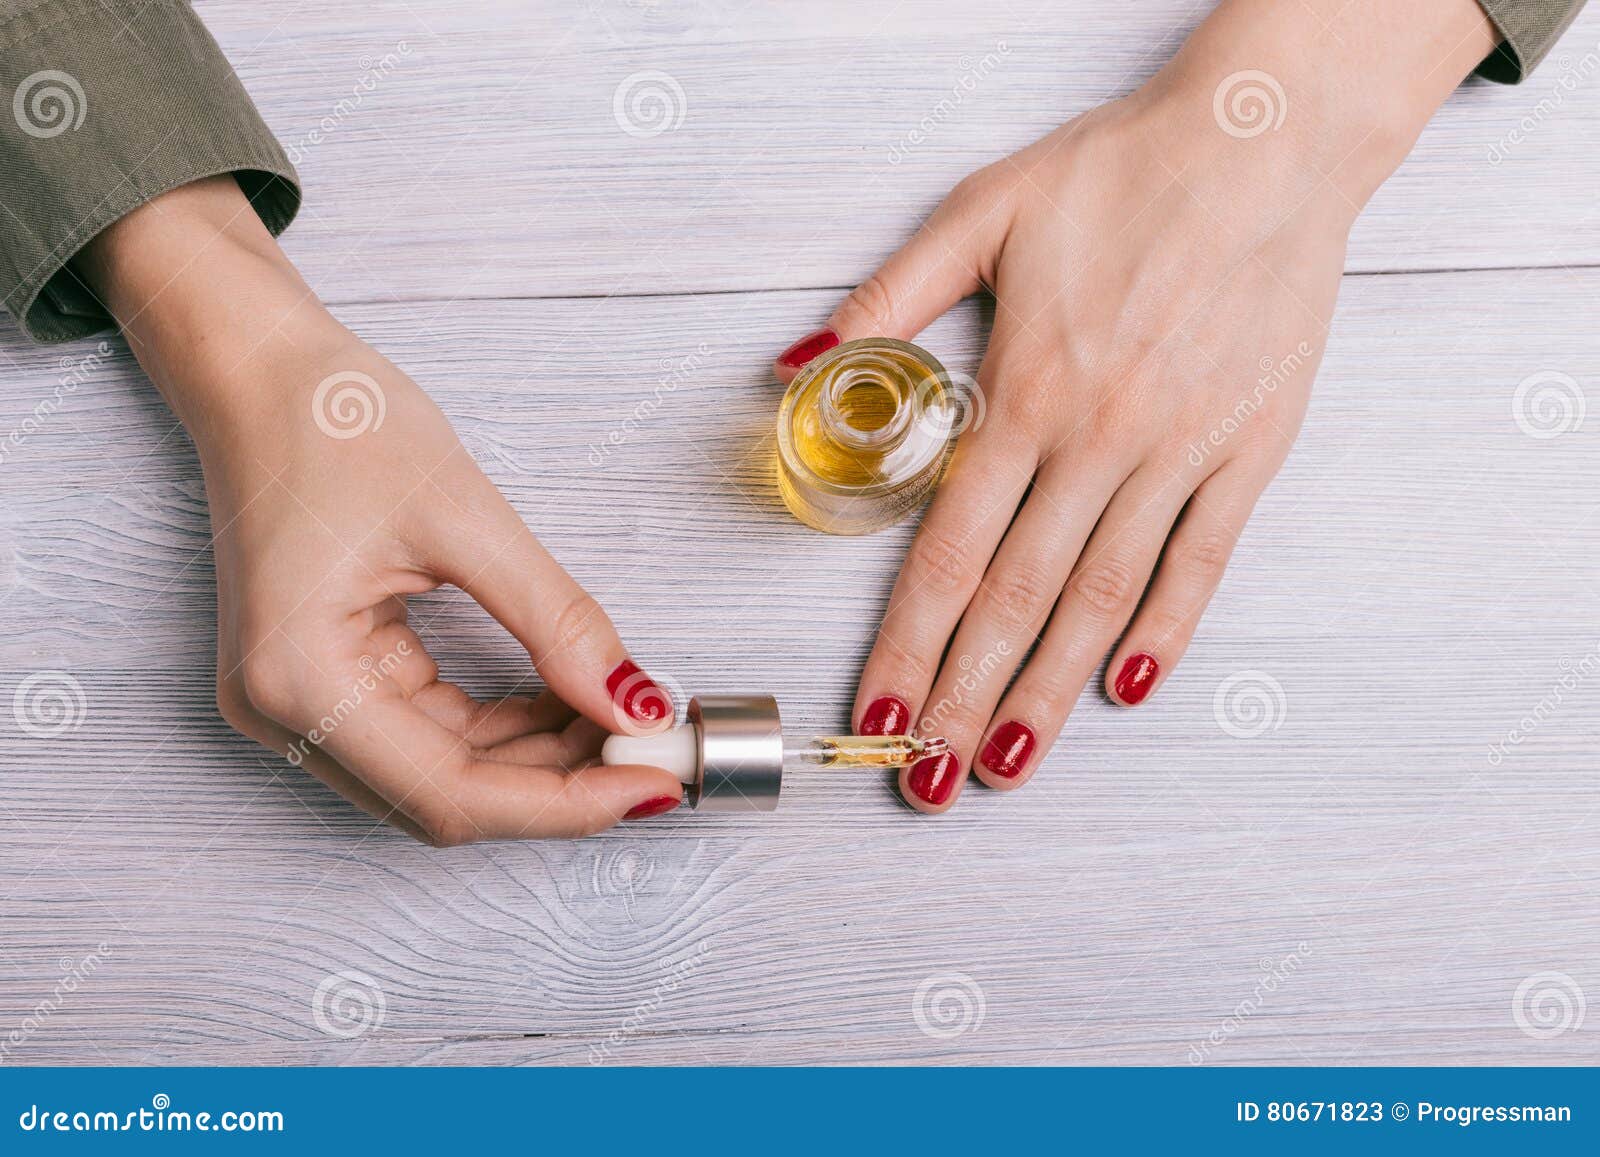 female hand applied oil on the nails